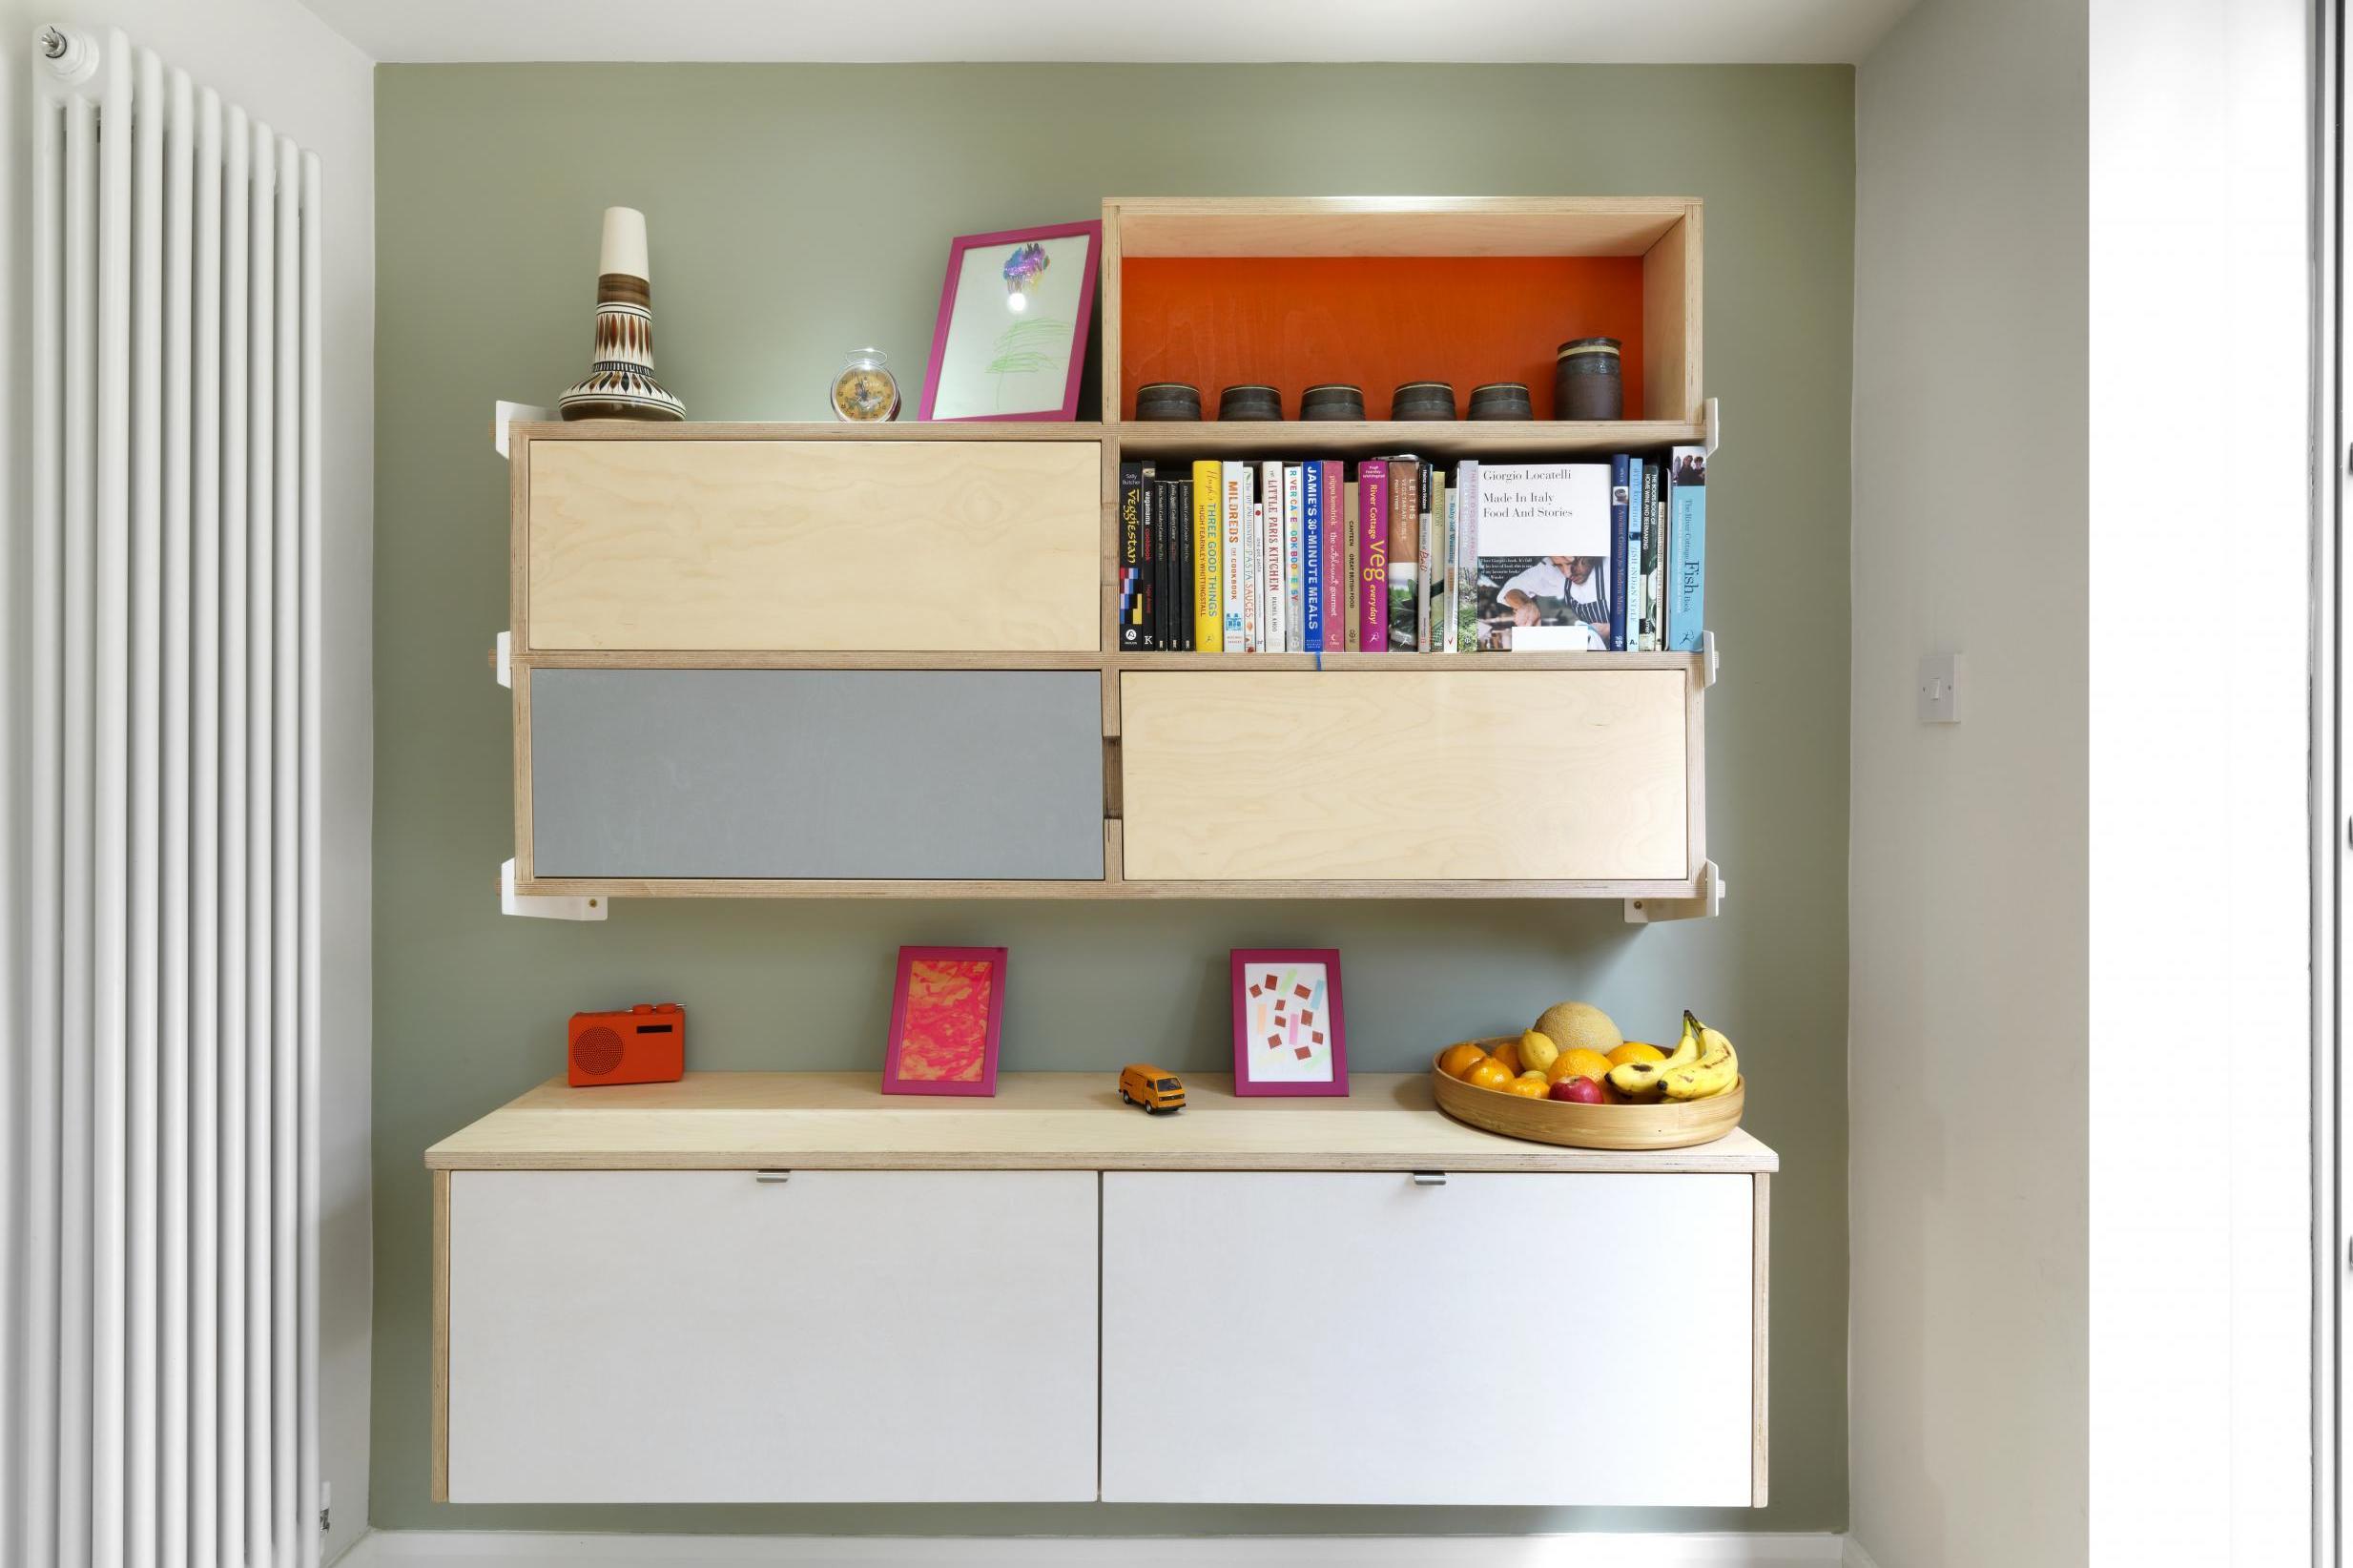 ‘The inside of every door of every closet can be used for hooks and racks and shelves’